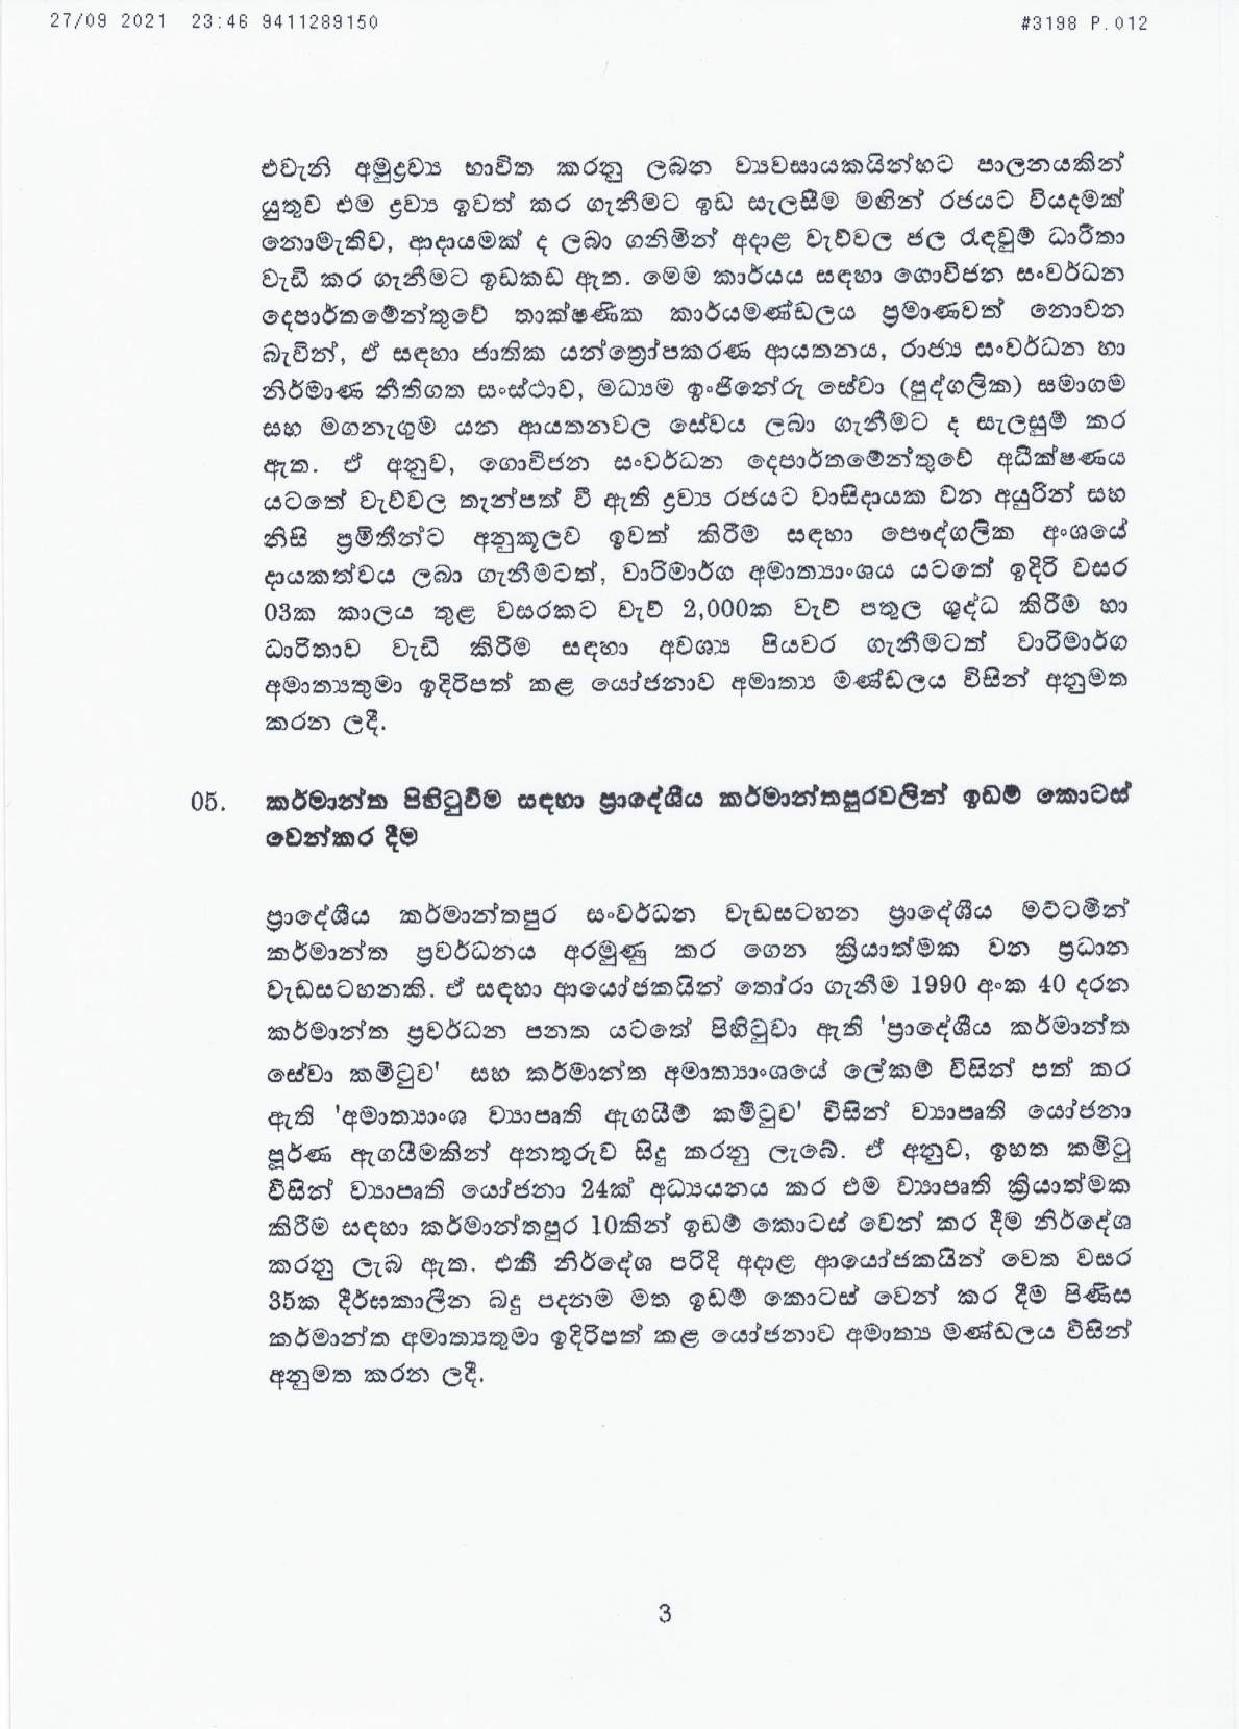 Cabinet Decisions on 27.09.2021 Sinhala page 003